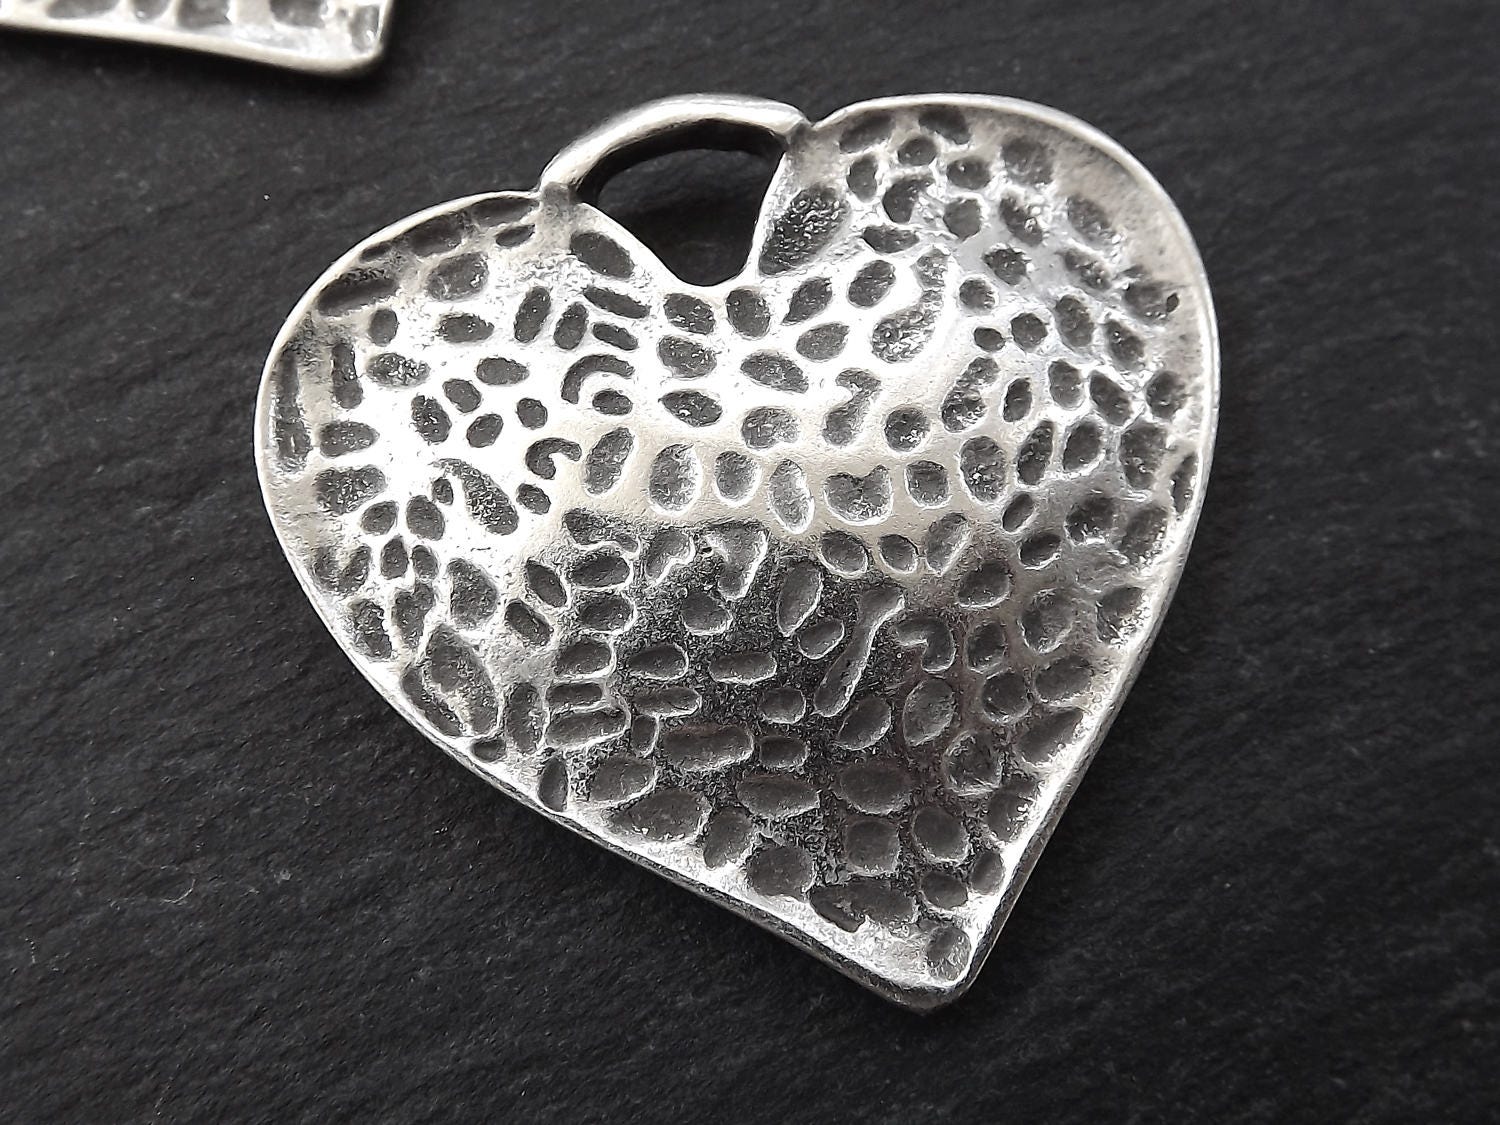 Large Silver Hammered Love Heart Pendant, Rustic Charm, Turkish Jewelry Making Supplies, Matte Antique Silver Plated - 1pc